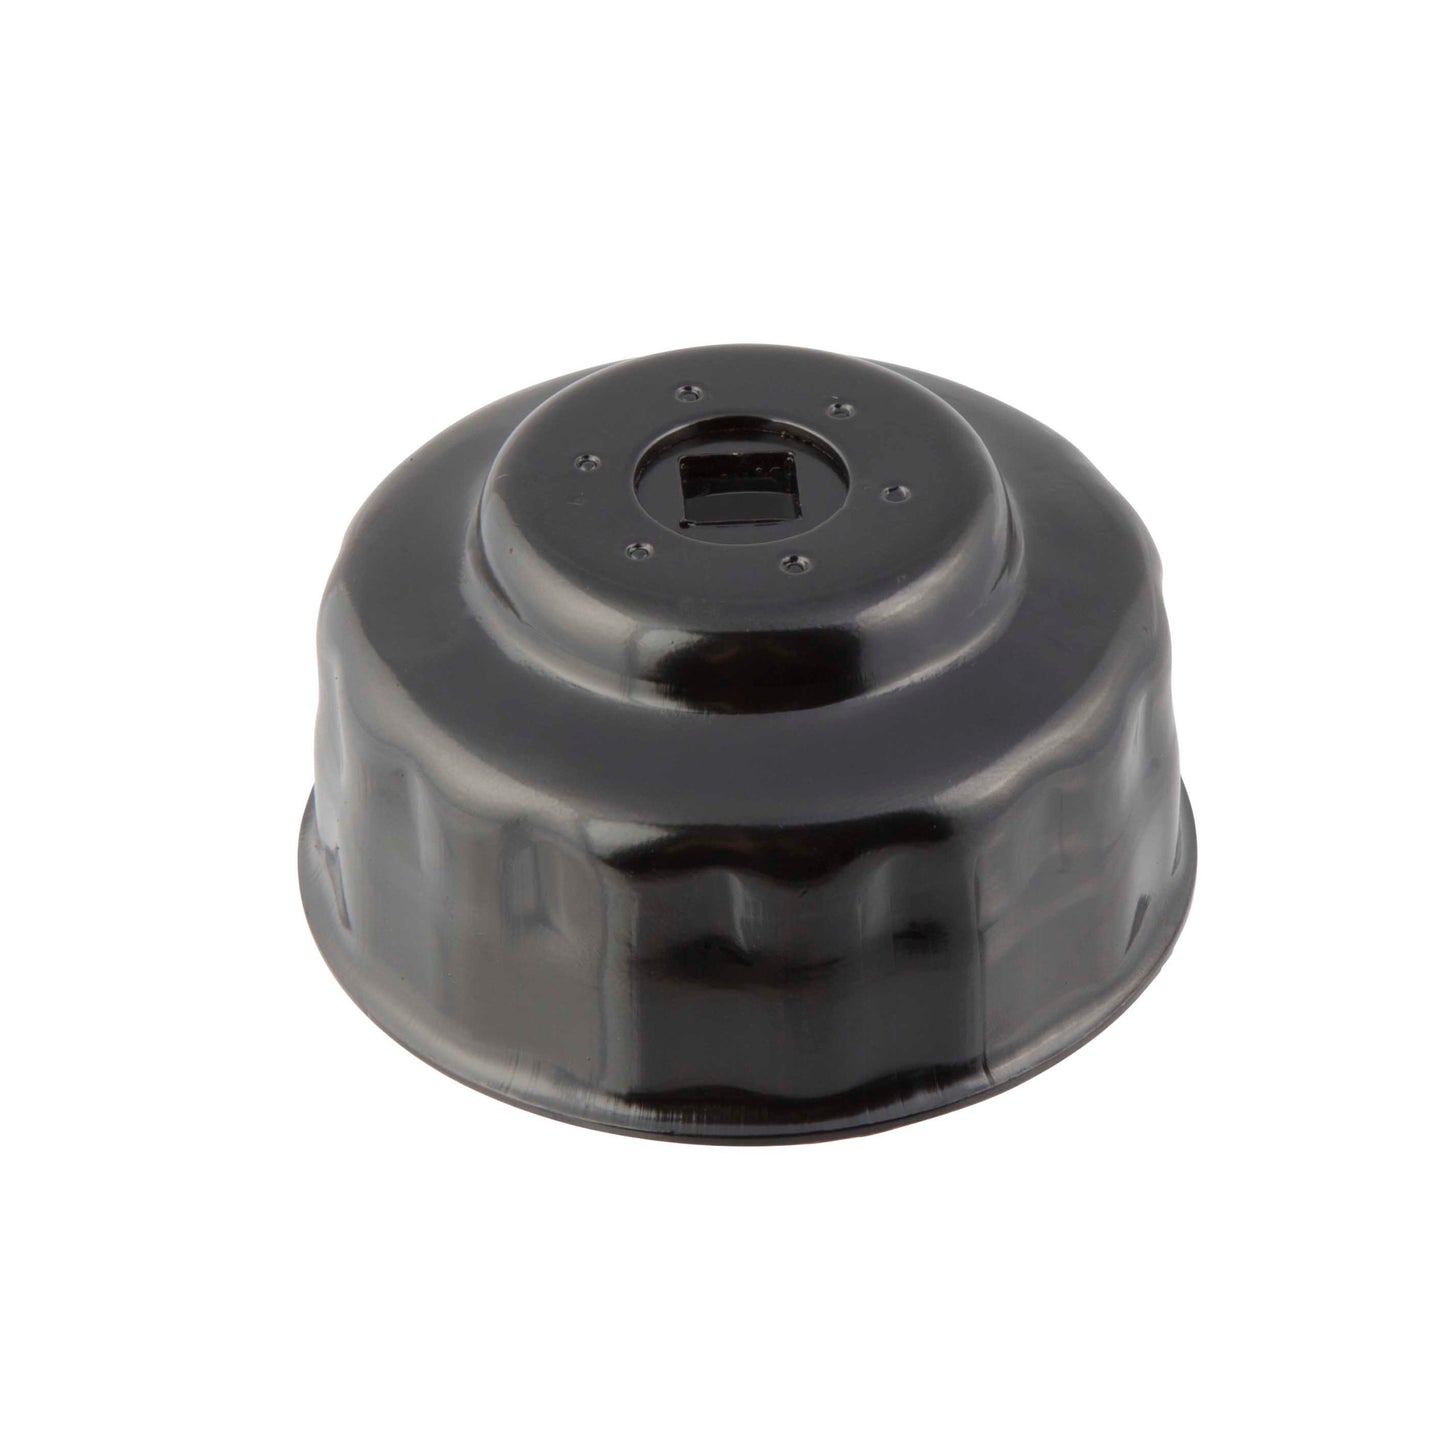 Oil Filter Cap Wrench 74mm and 76mm x 15 Flute